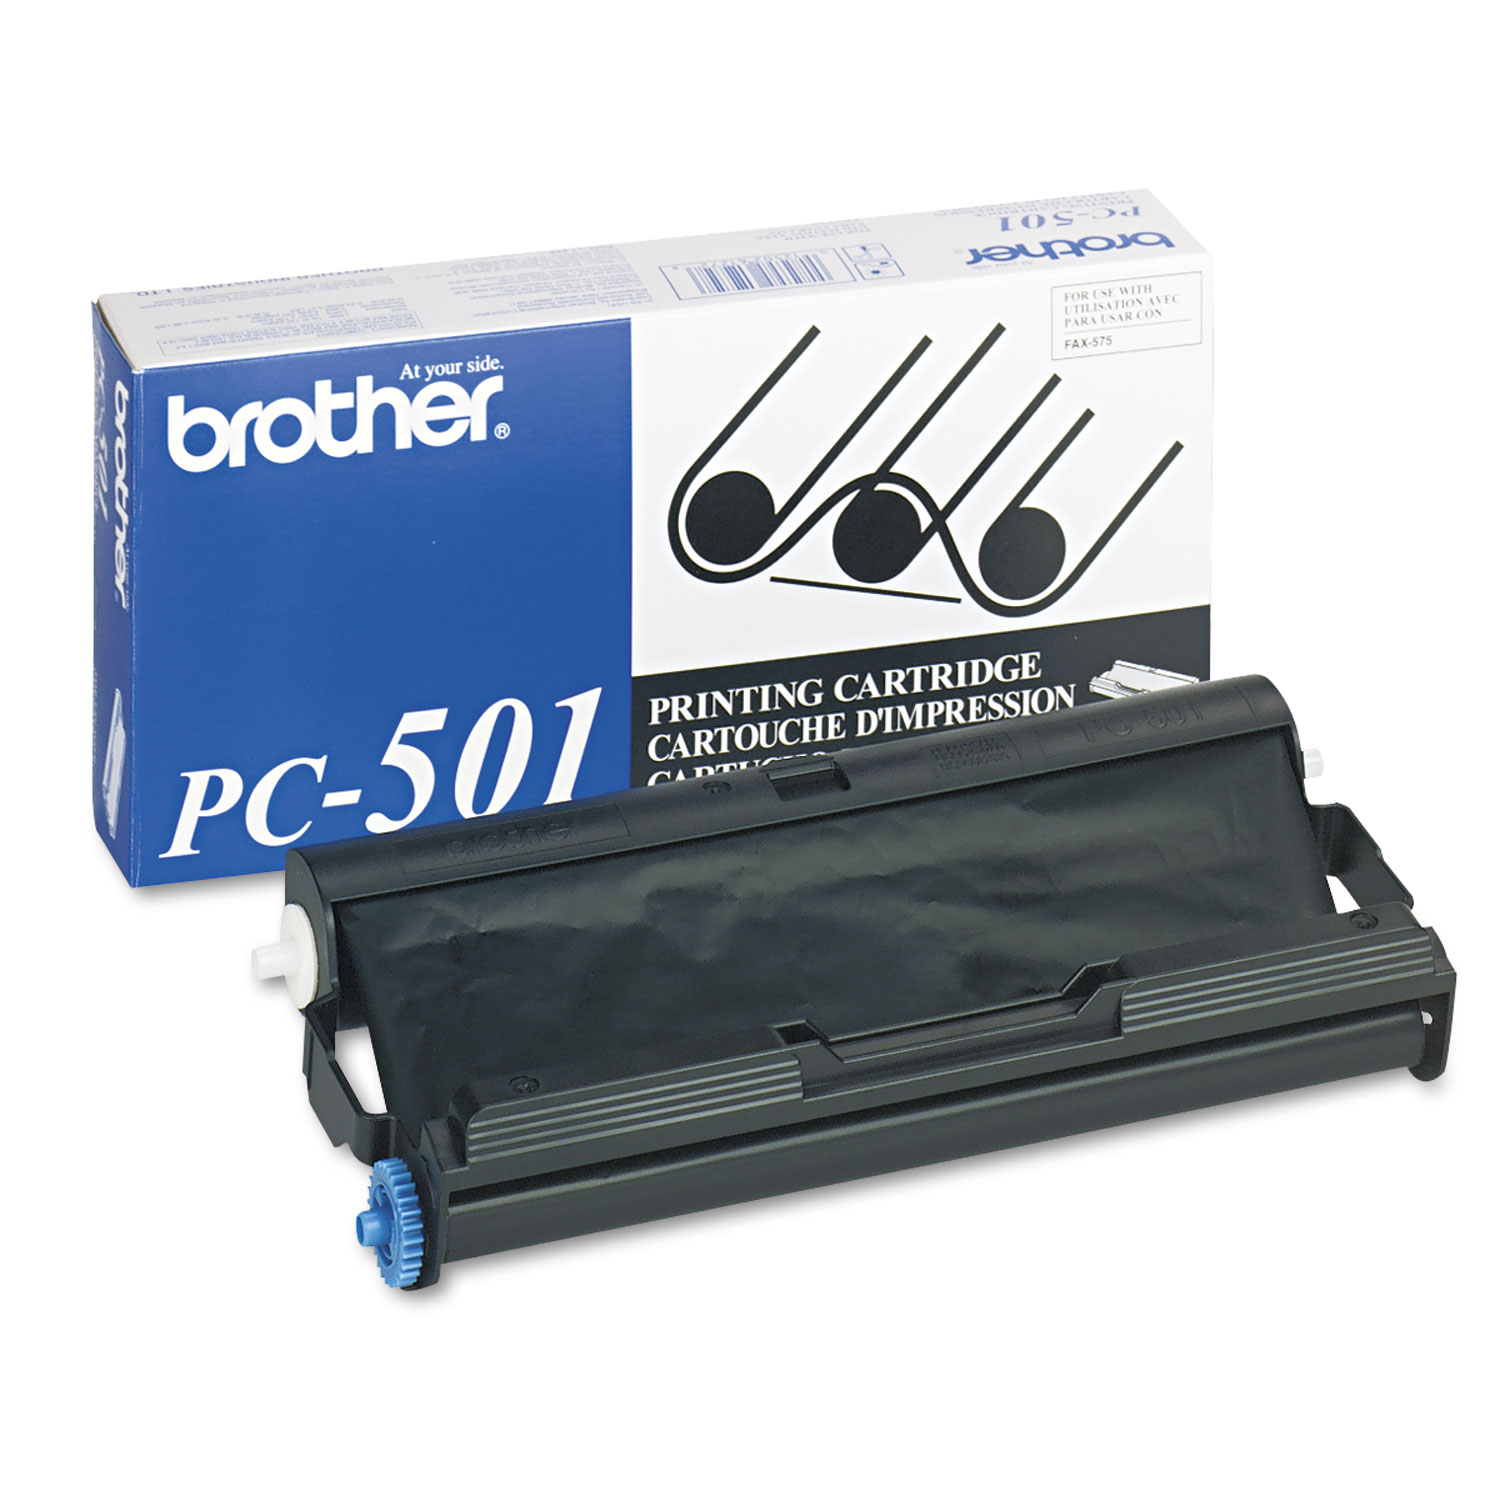  Brother PC501 PC-501 Thermal Transfer Print Cartridge, 150 Page-Yield, Black (BRTPC501) 